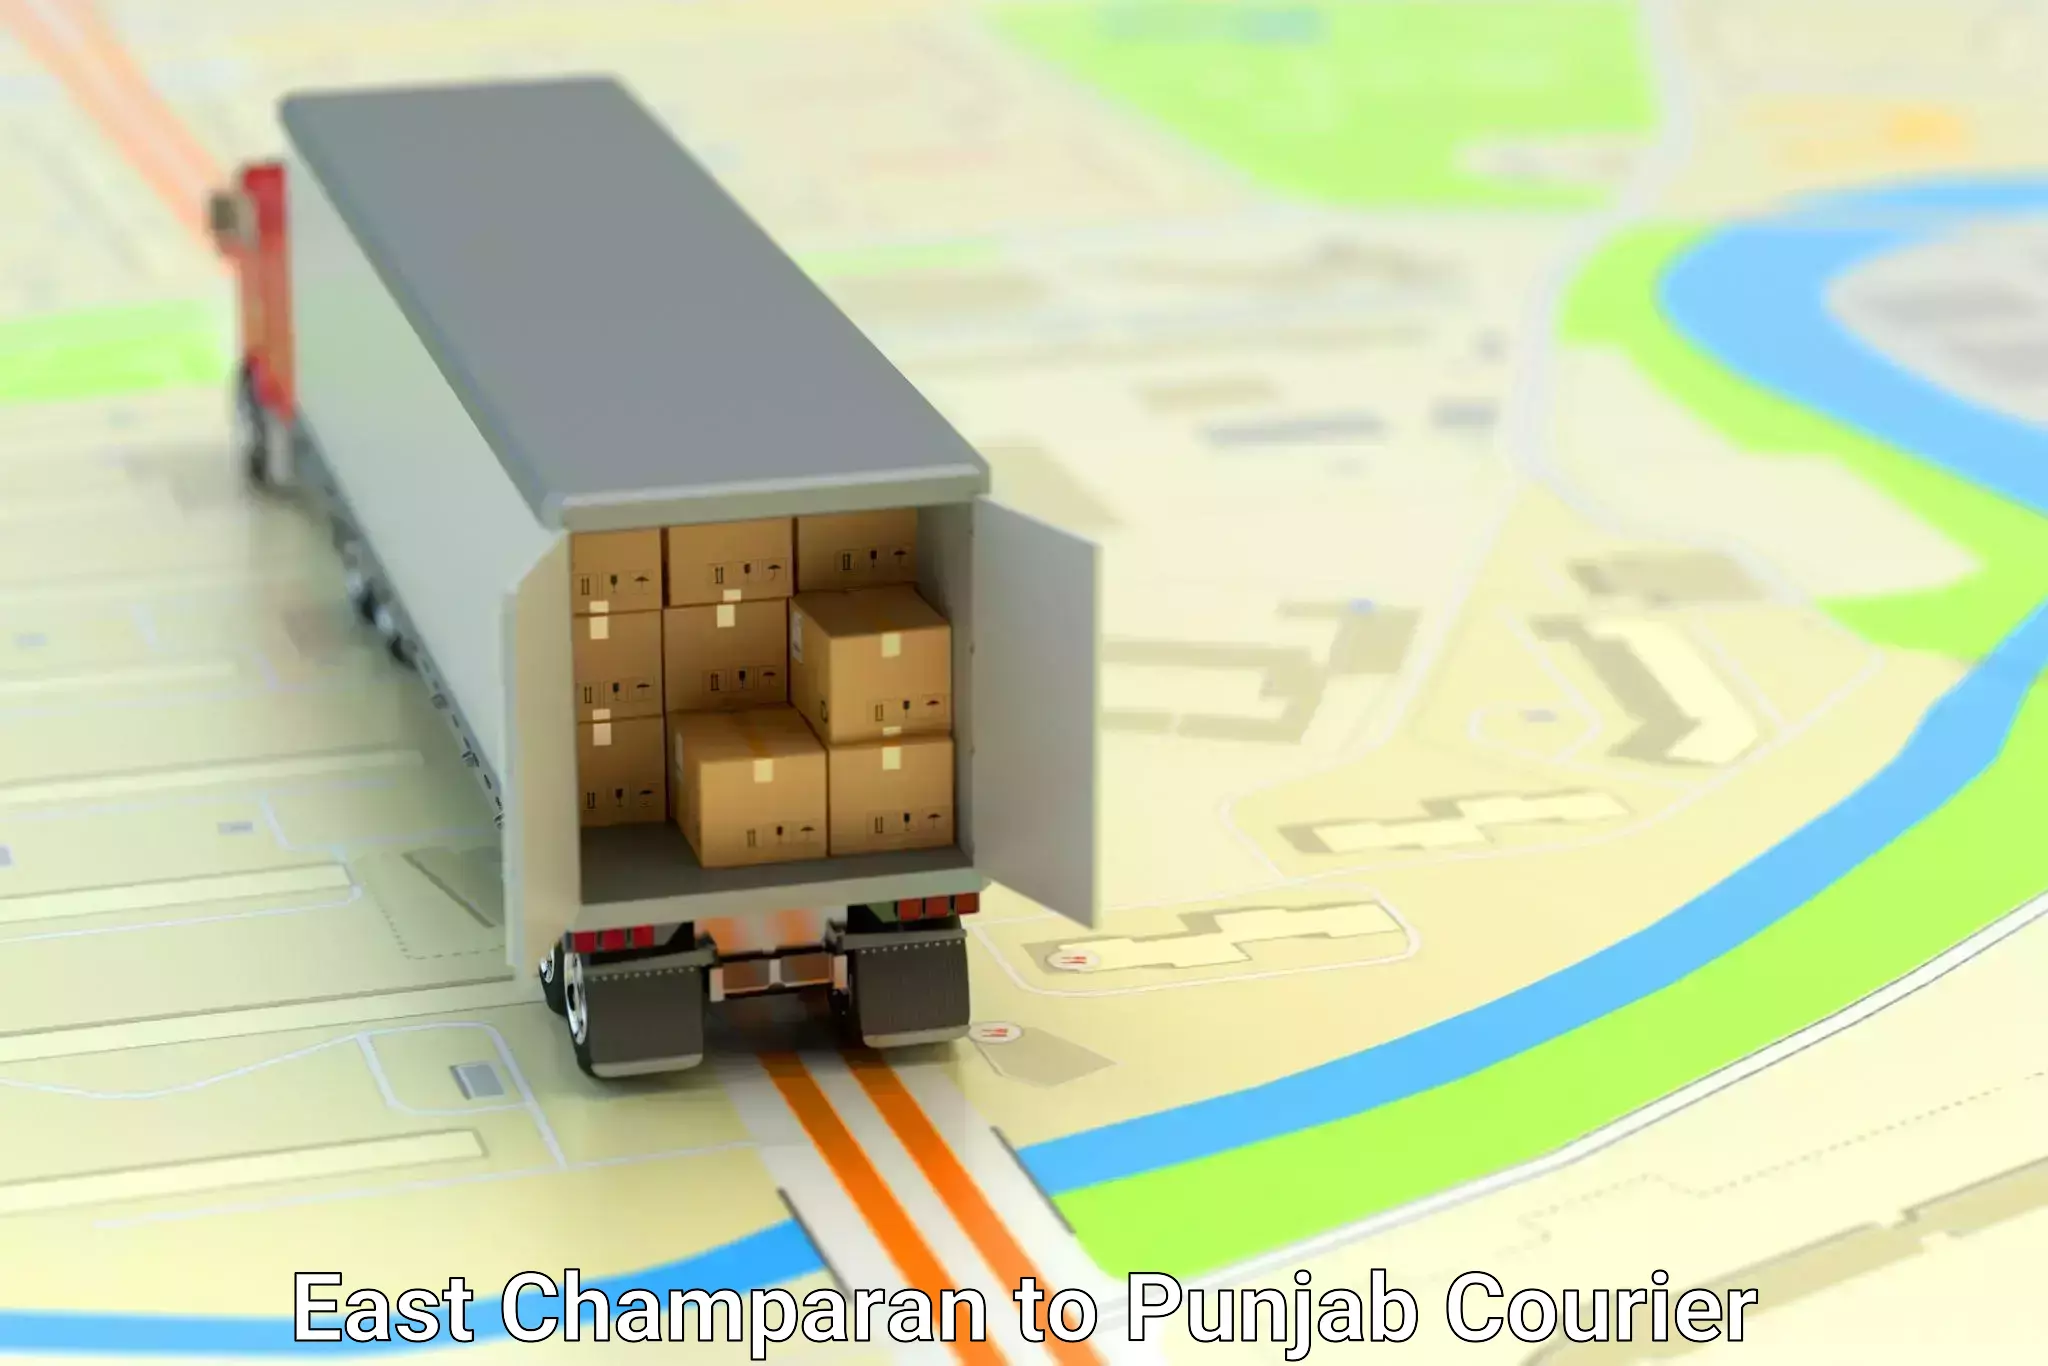 Quality moving company East Champaran to Amritsar